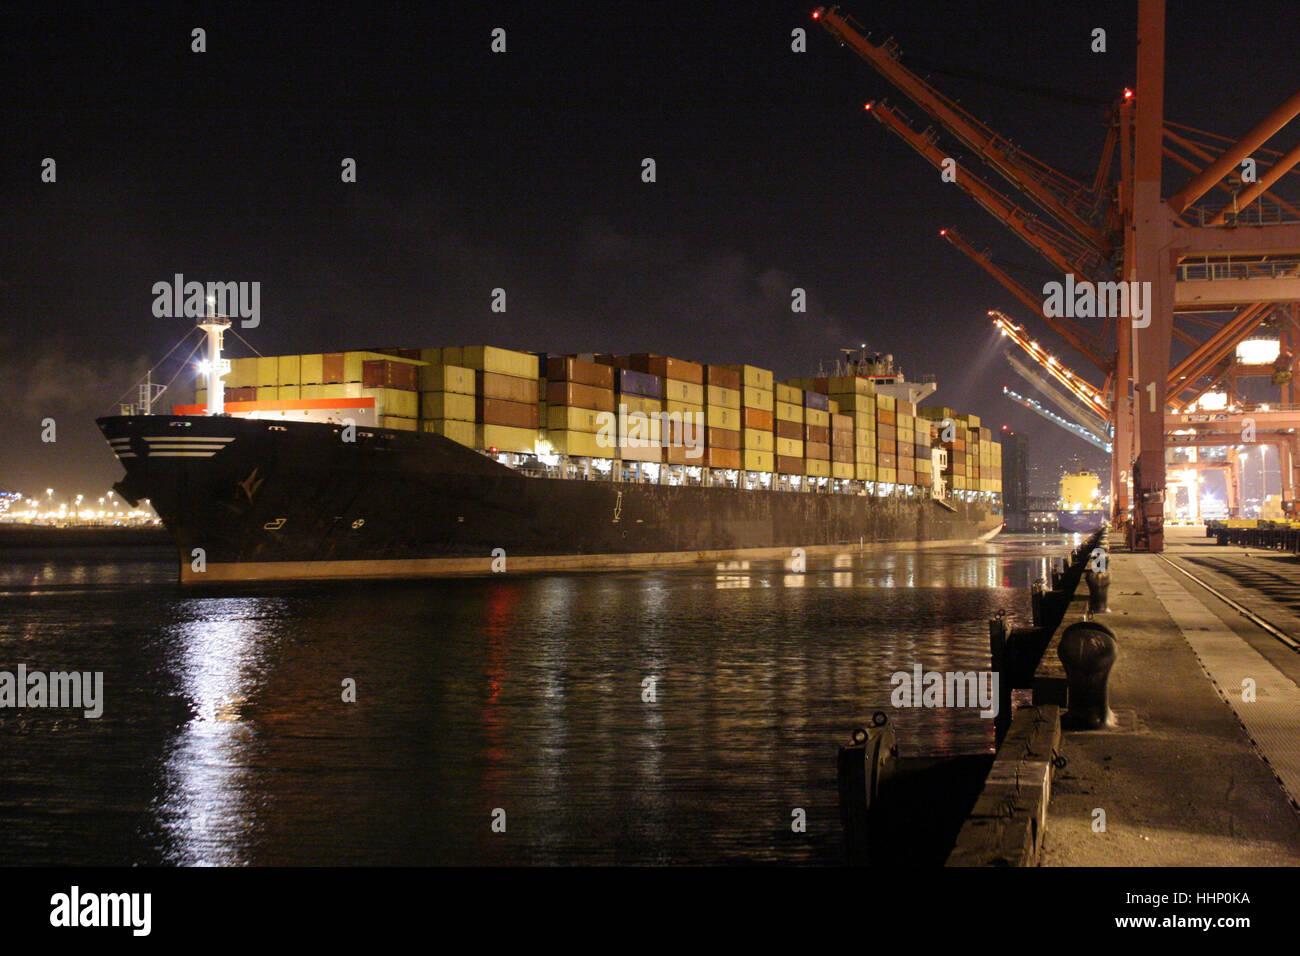 Cargo containers on freighter in port Stock Photo